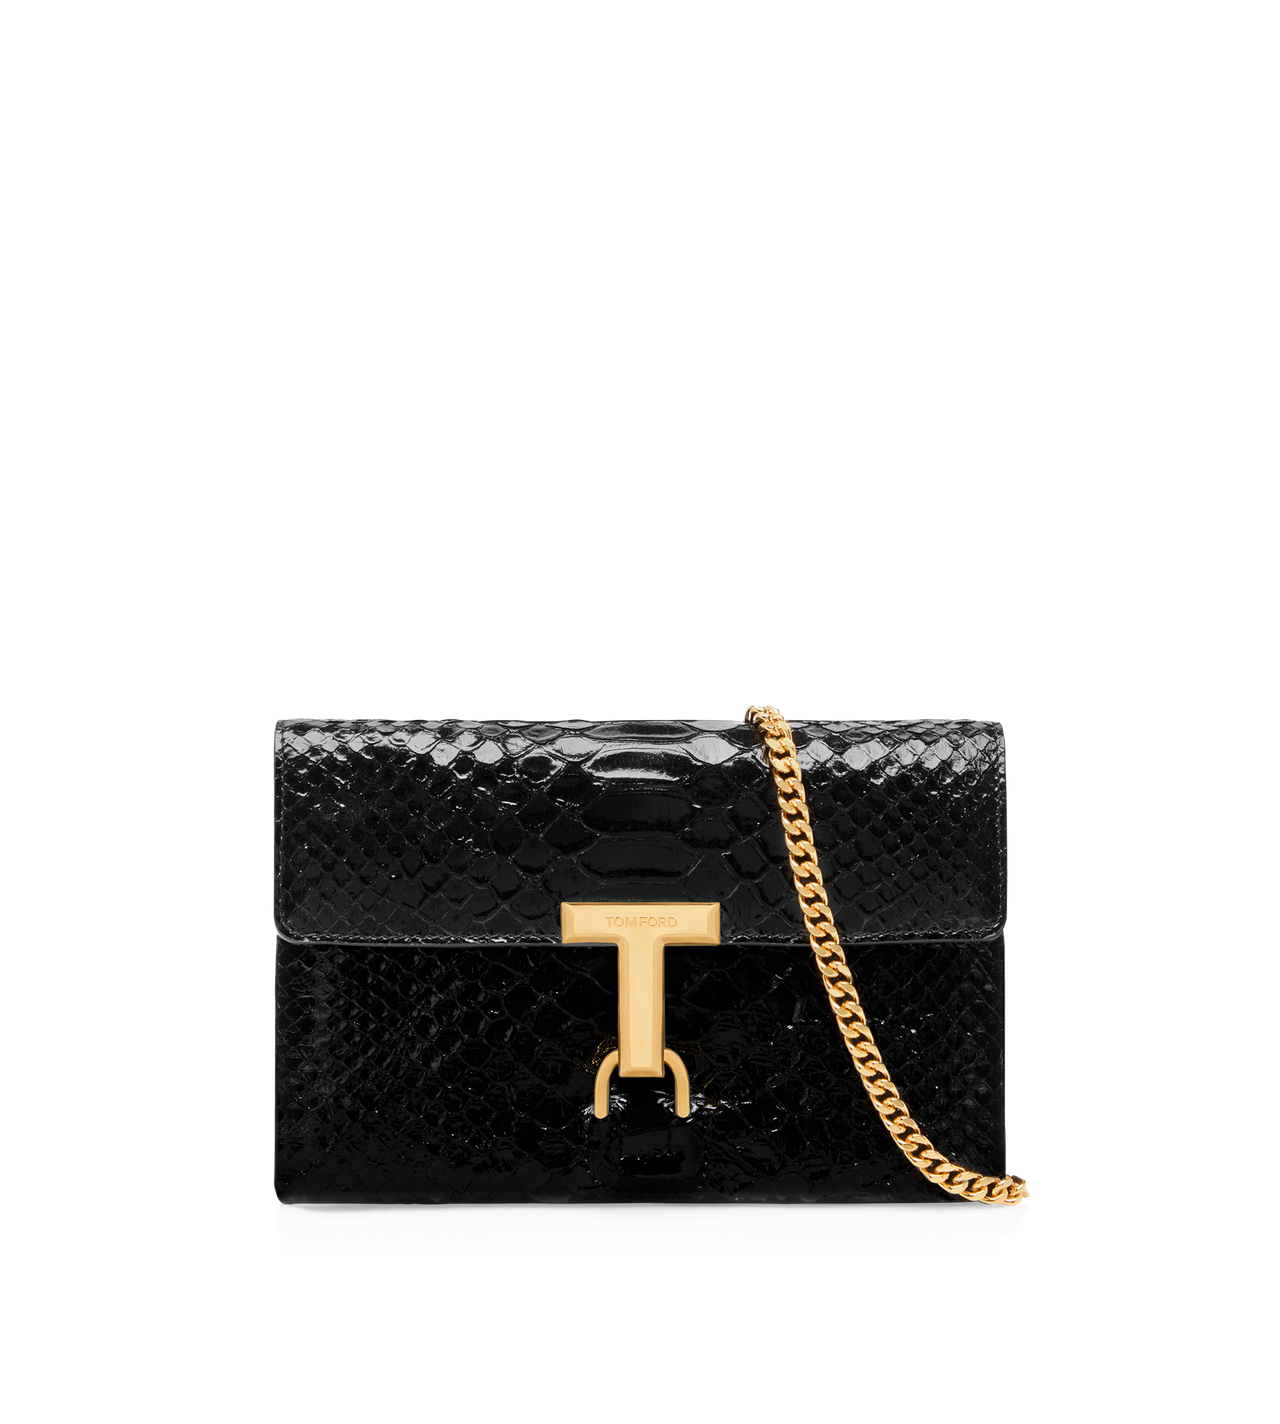 STAMPED PYTHON LEATHER MONARCH MINI BAG image number 0